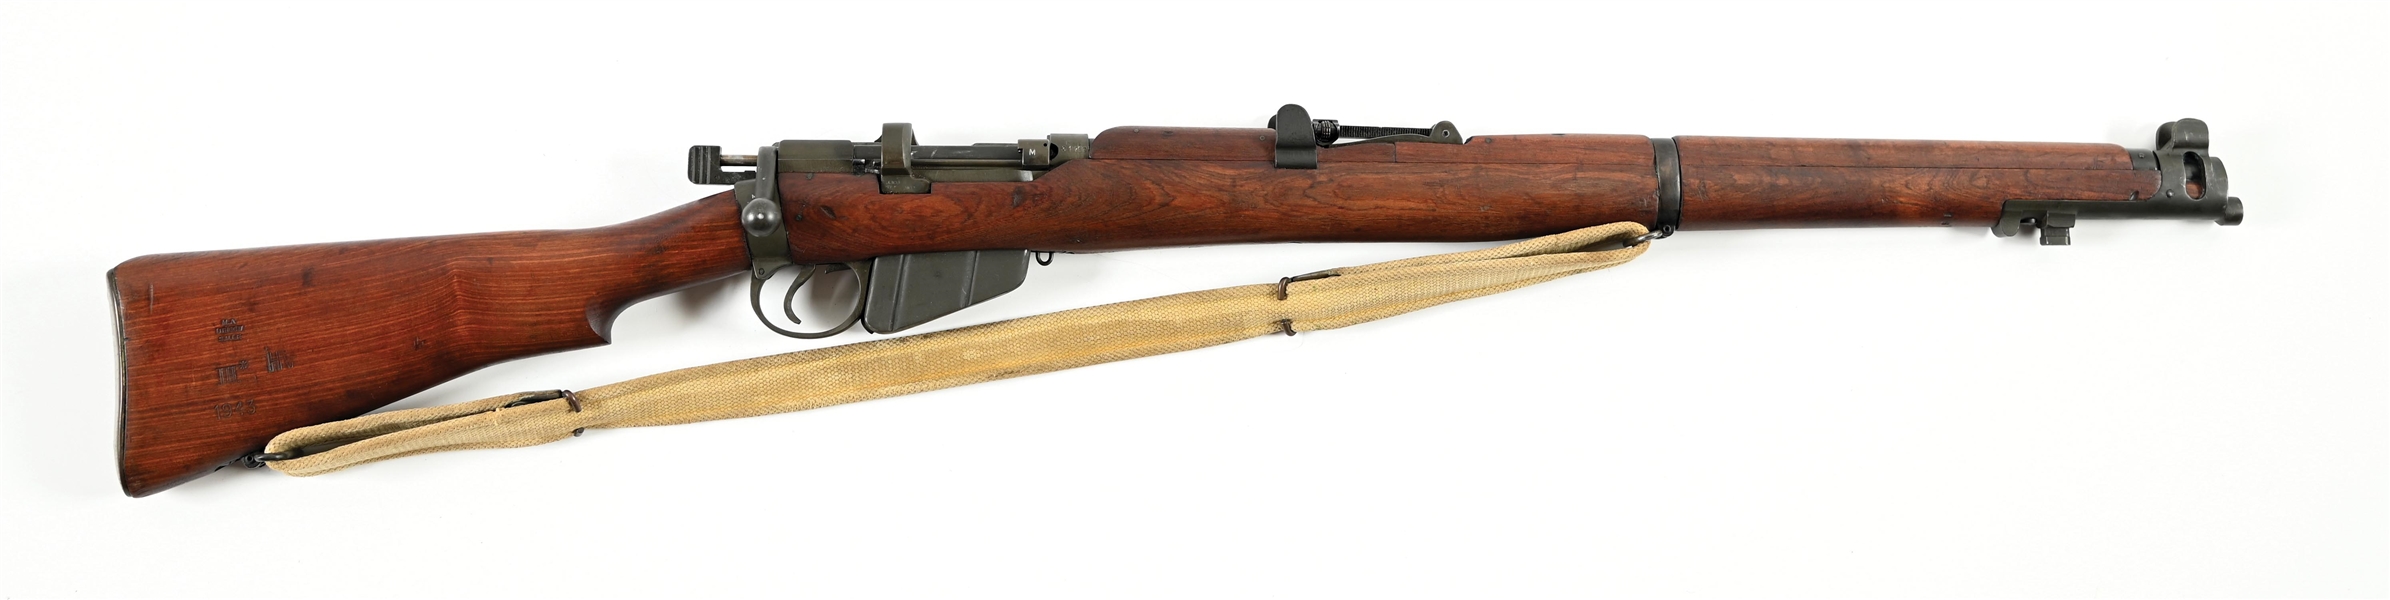 (C) FINE WWII LITHGOW SMLE III* BOLT ACTION RIFLE.